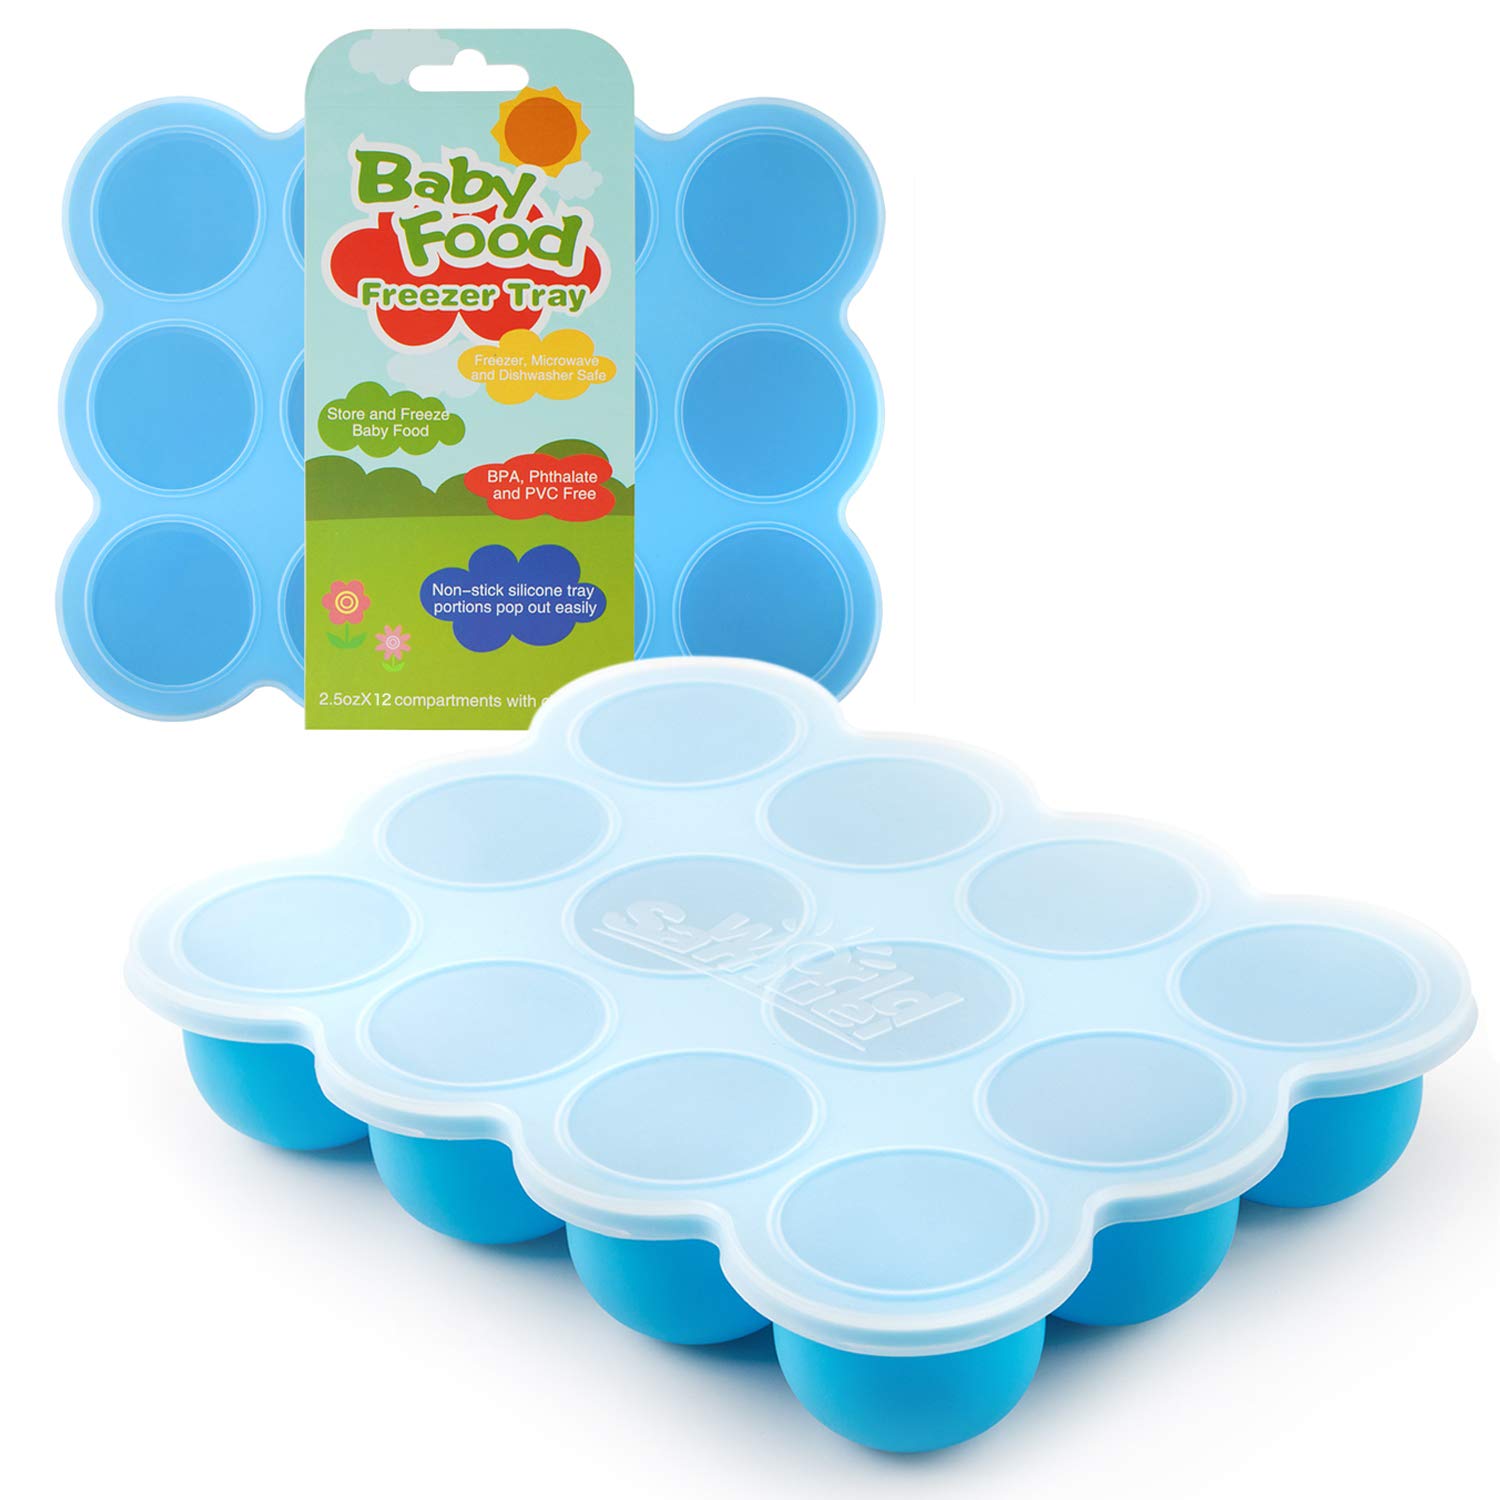 Samuelworld Baby Food Storage Container, 12 Portions Freezer Tray